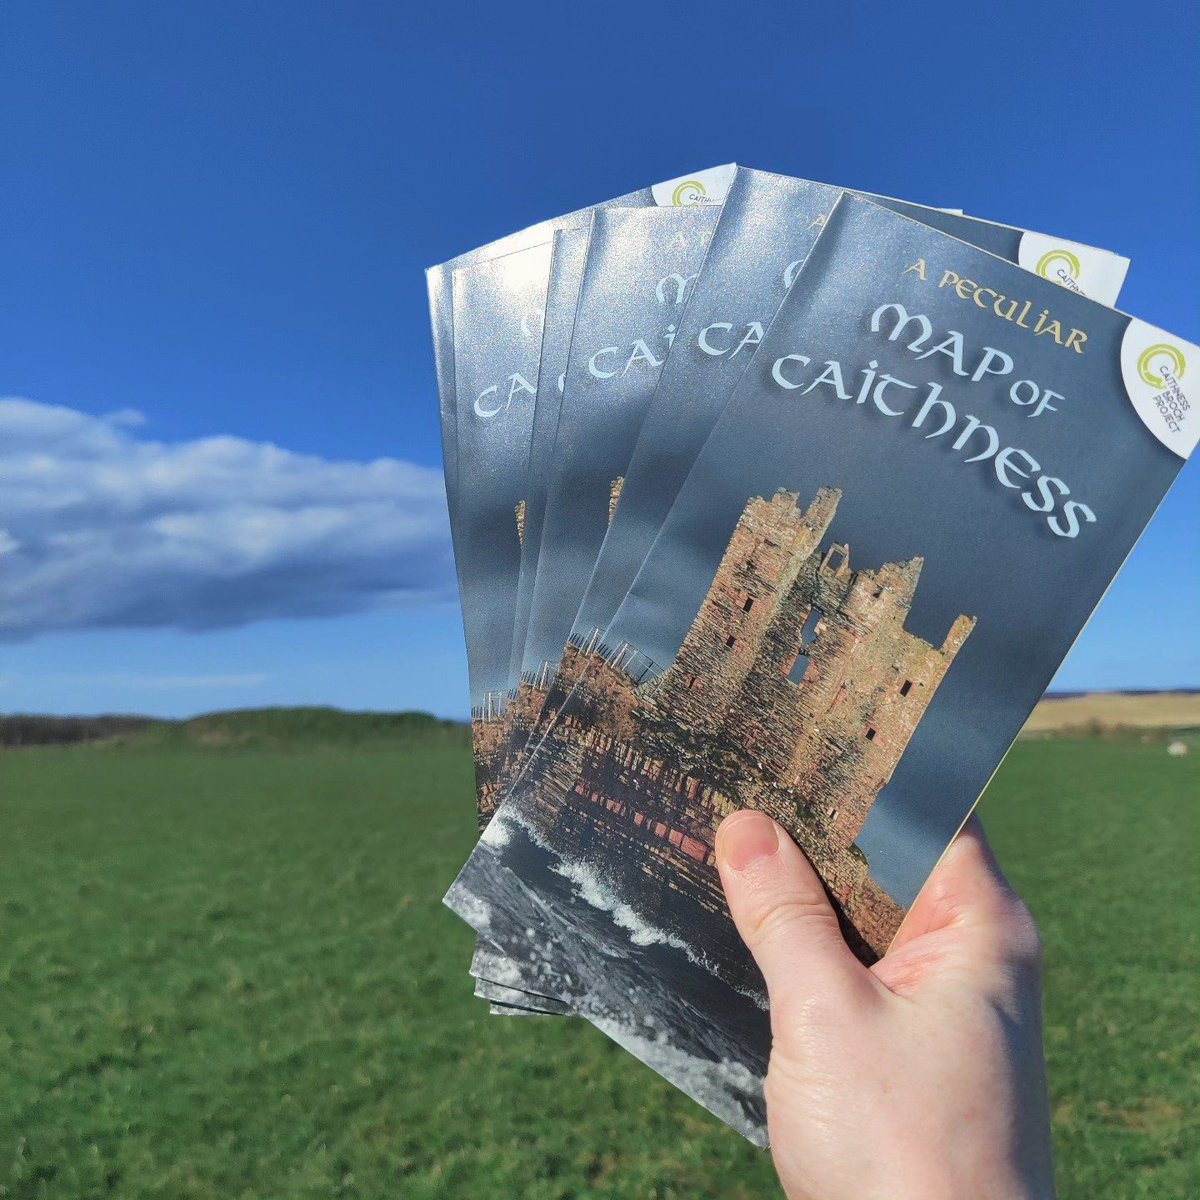 Calling all #Highlands Businesses! Scratching your head when someone asks what there is to do in #Caithness? Just foist one of these on 'em, and let our peculiar map do the talking. If you want some, let us know!